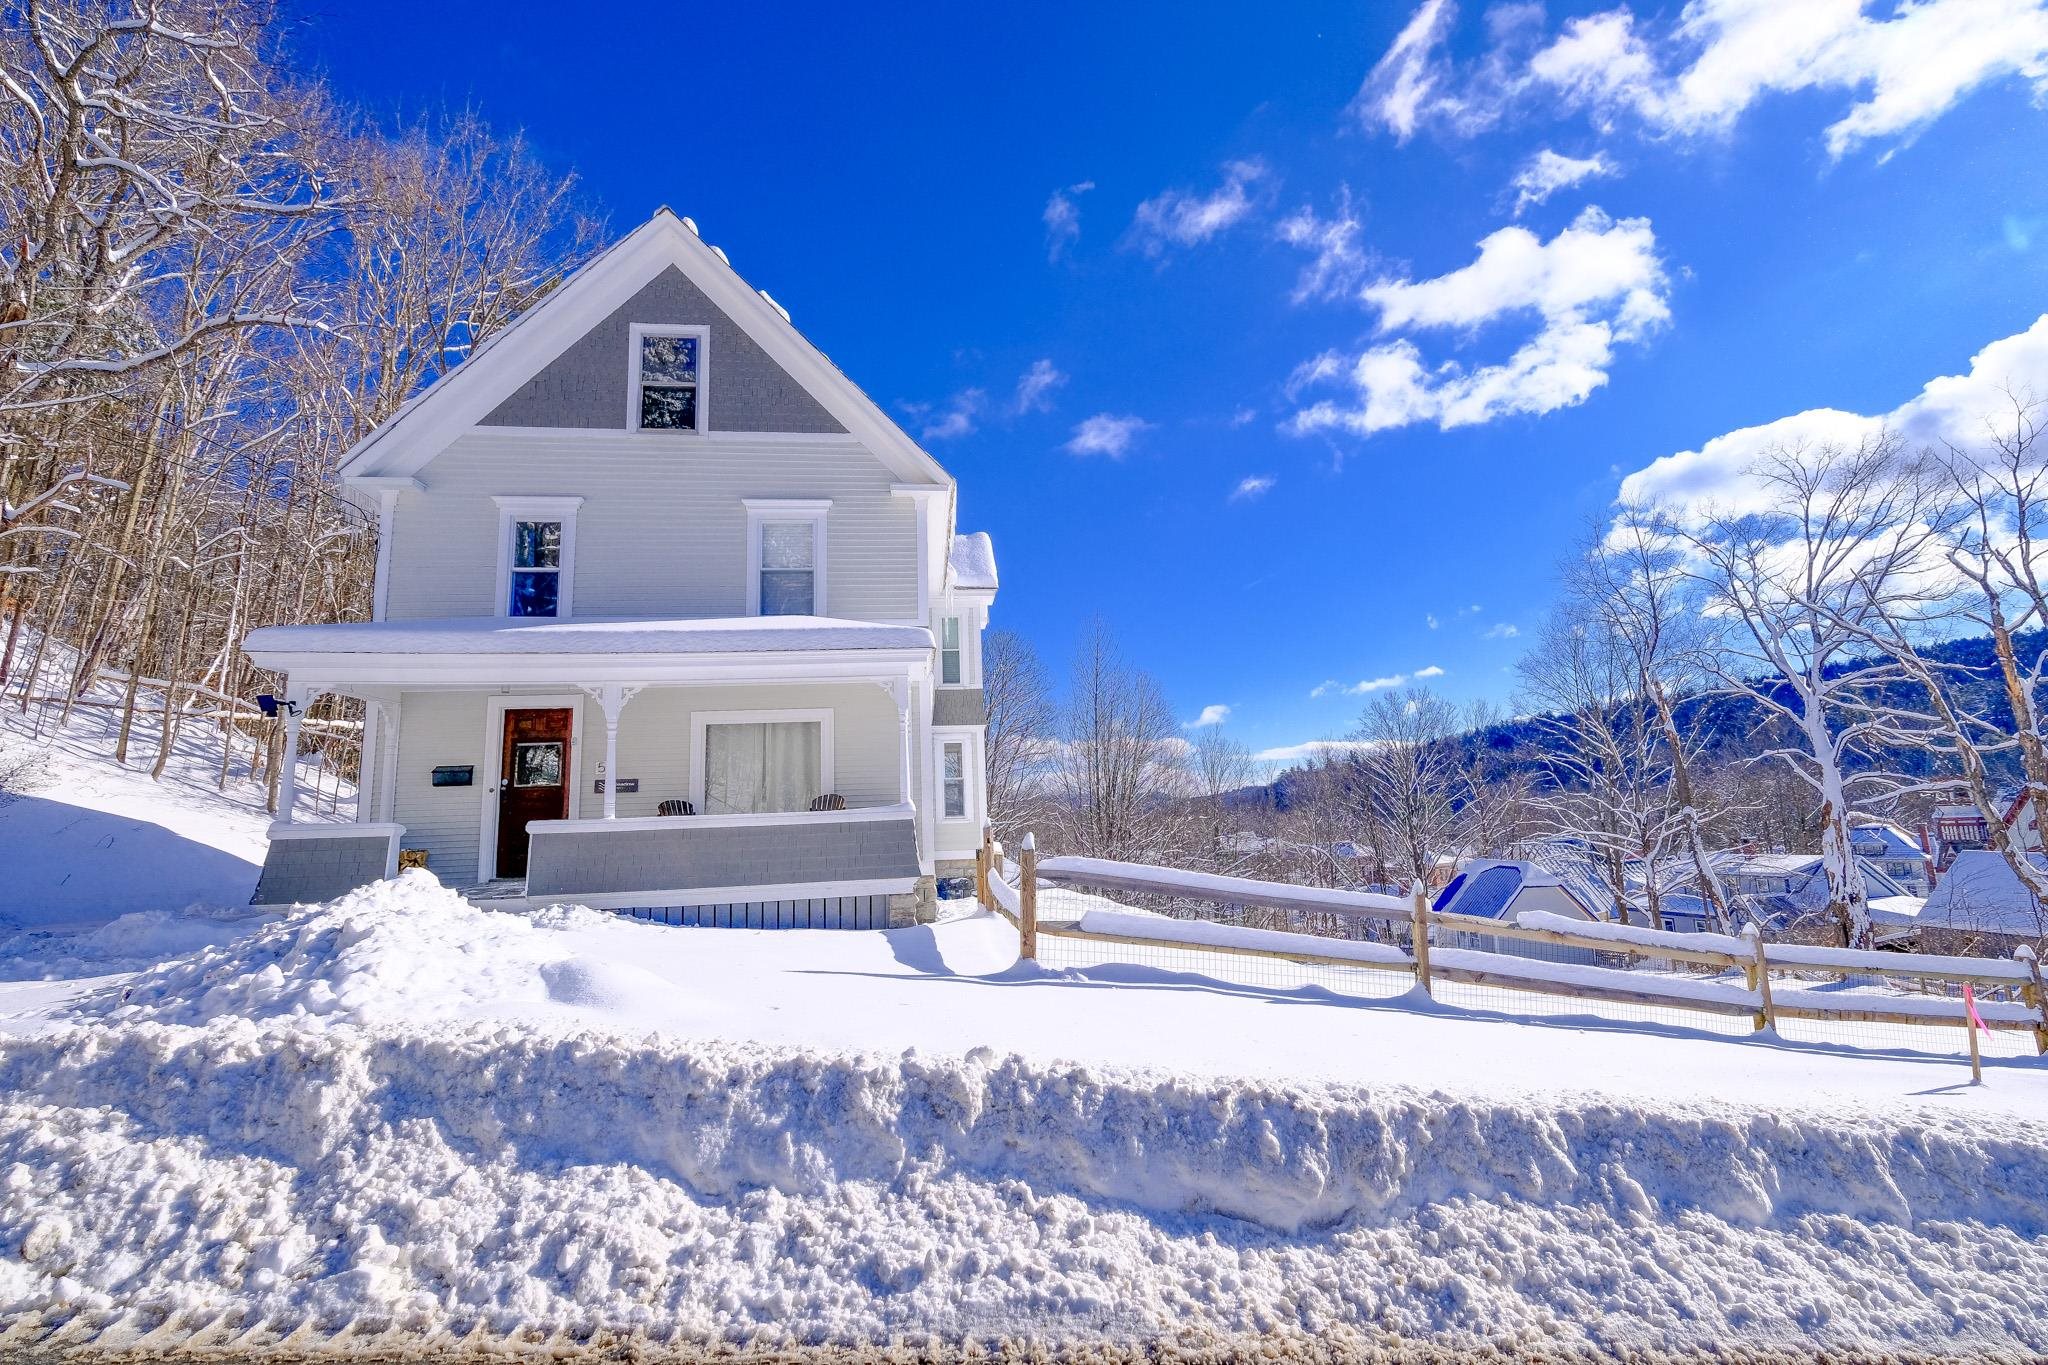 LUDLOW VT Homes for sale